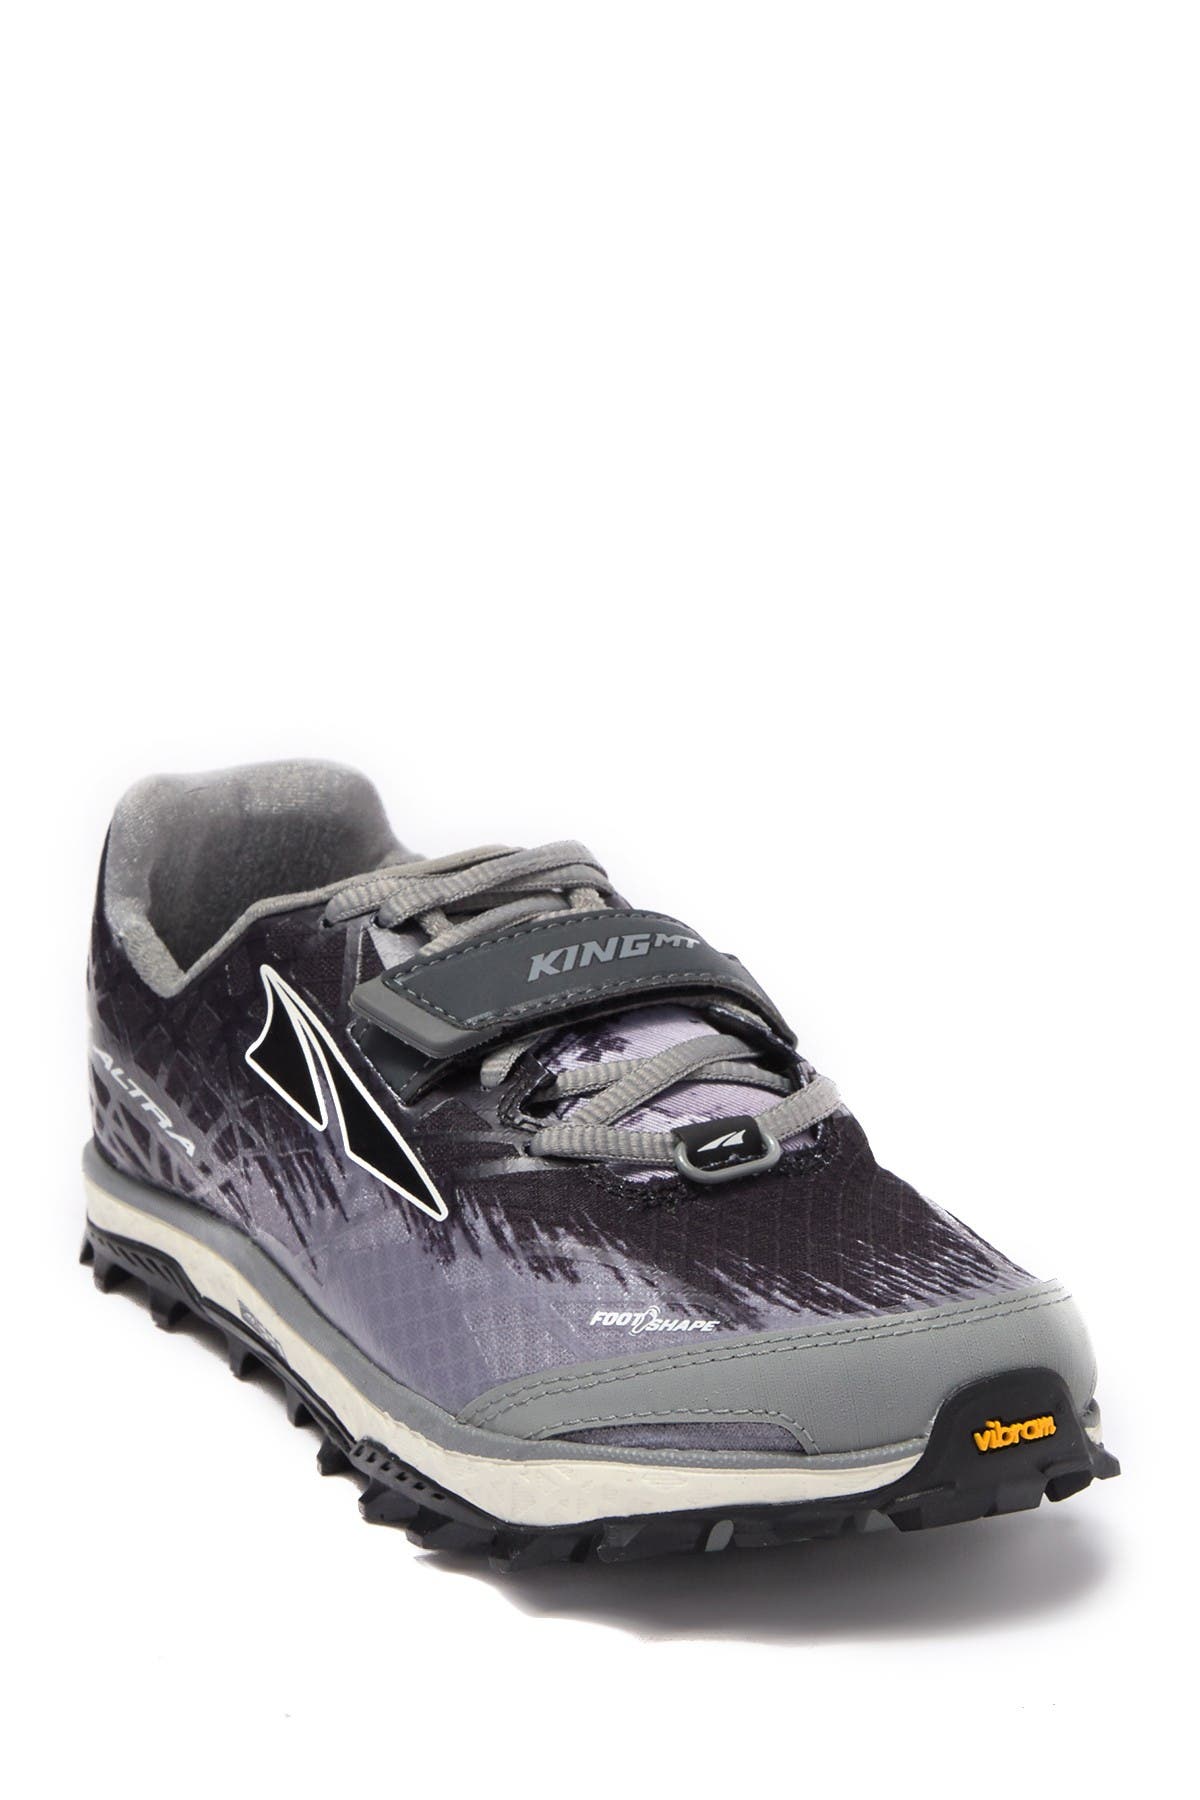 ALTRA | King MT 1.5 Athletic Sneaker 